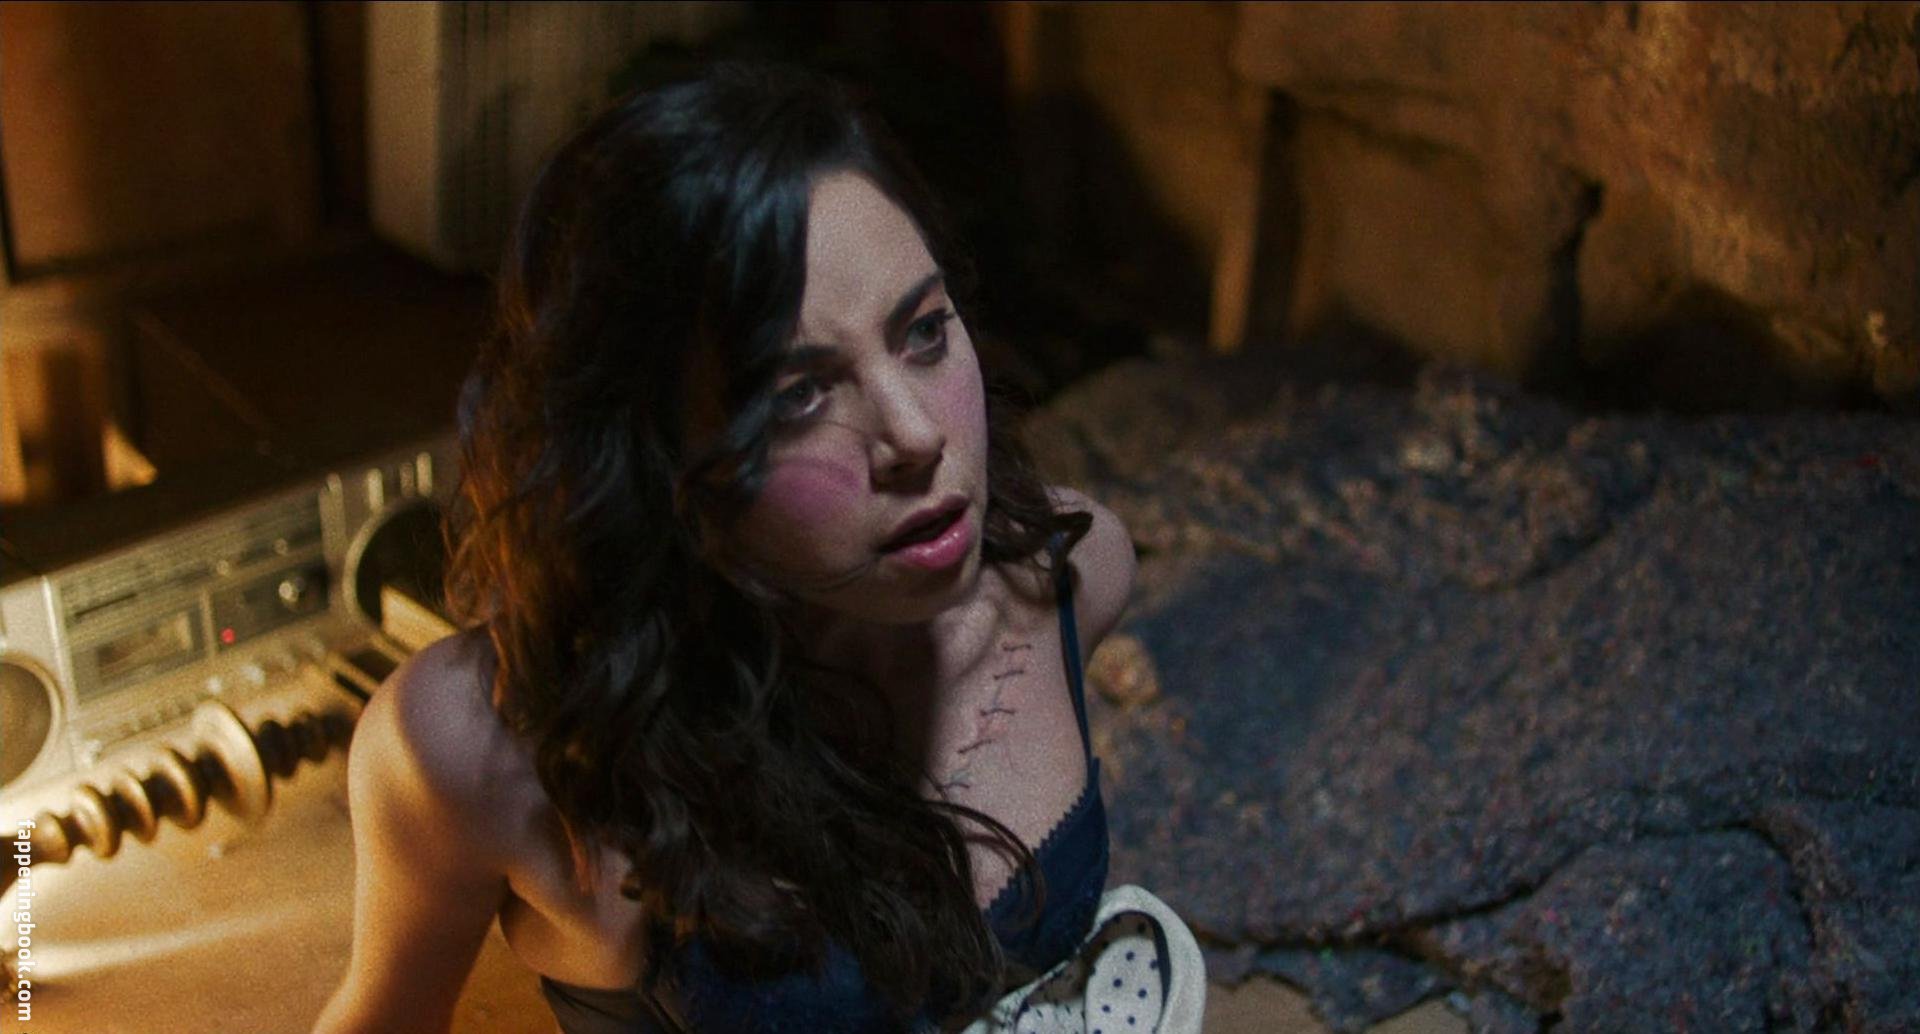 Aubrey Plaza Nude, The Fappening - Photo #58576 - FappeningBook.